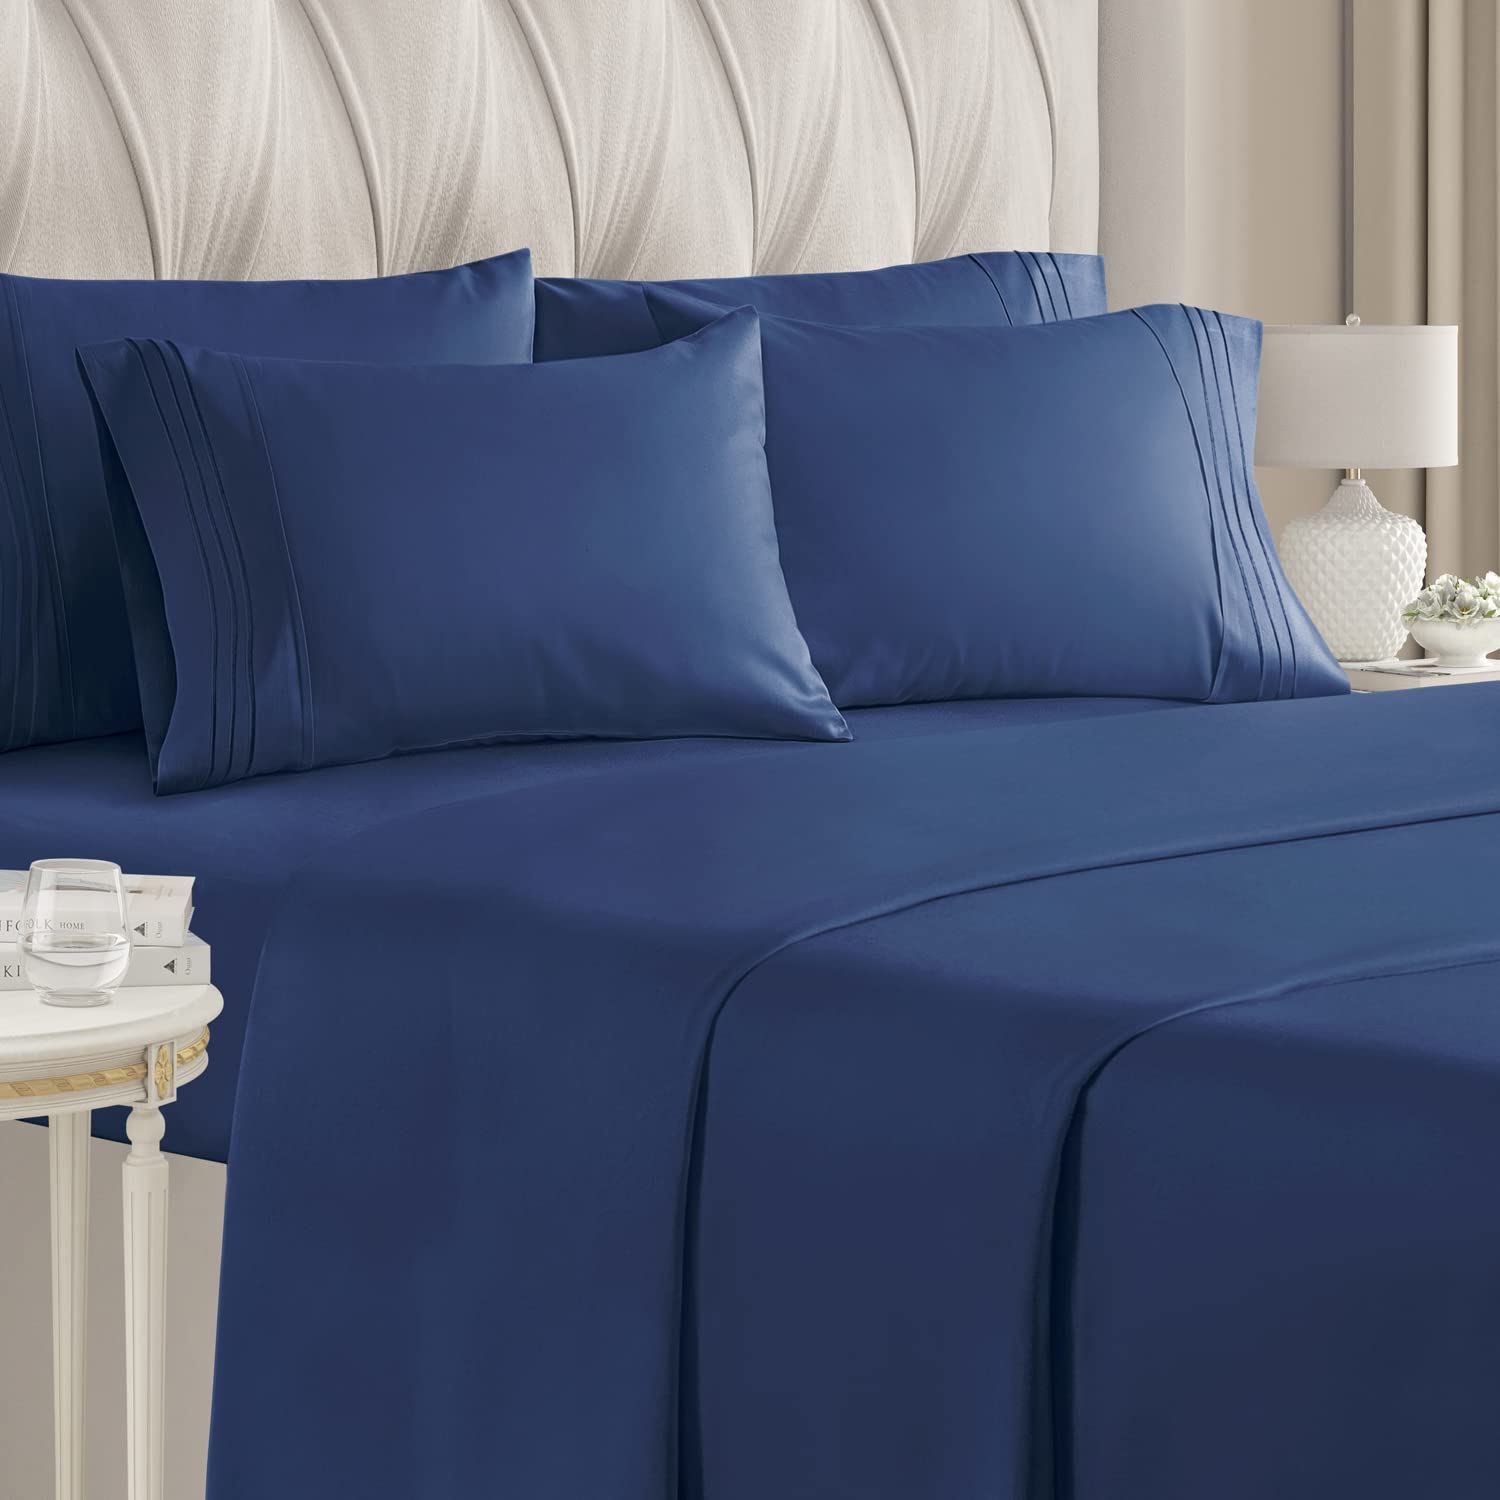 Book Cover California King Size Sheet Set - 6 Piece Set - Hotel Luxury Bed Sheets - Extra Soft - Deep Pockets - Easy Fit - Breathable & Cooling - Wrinkle Free - Navy Blue Bed Sheets - Cali Kings Sheets - Royal 11 - Navy Blue California King